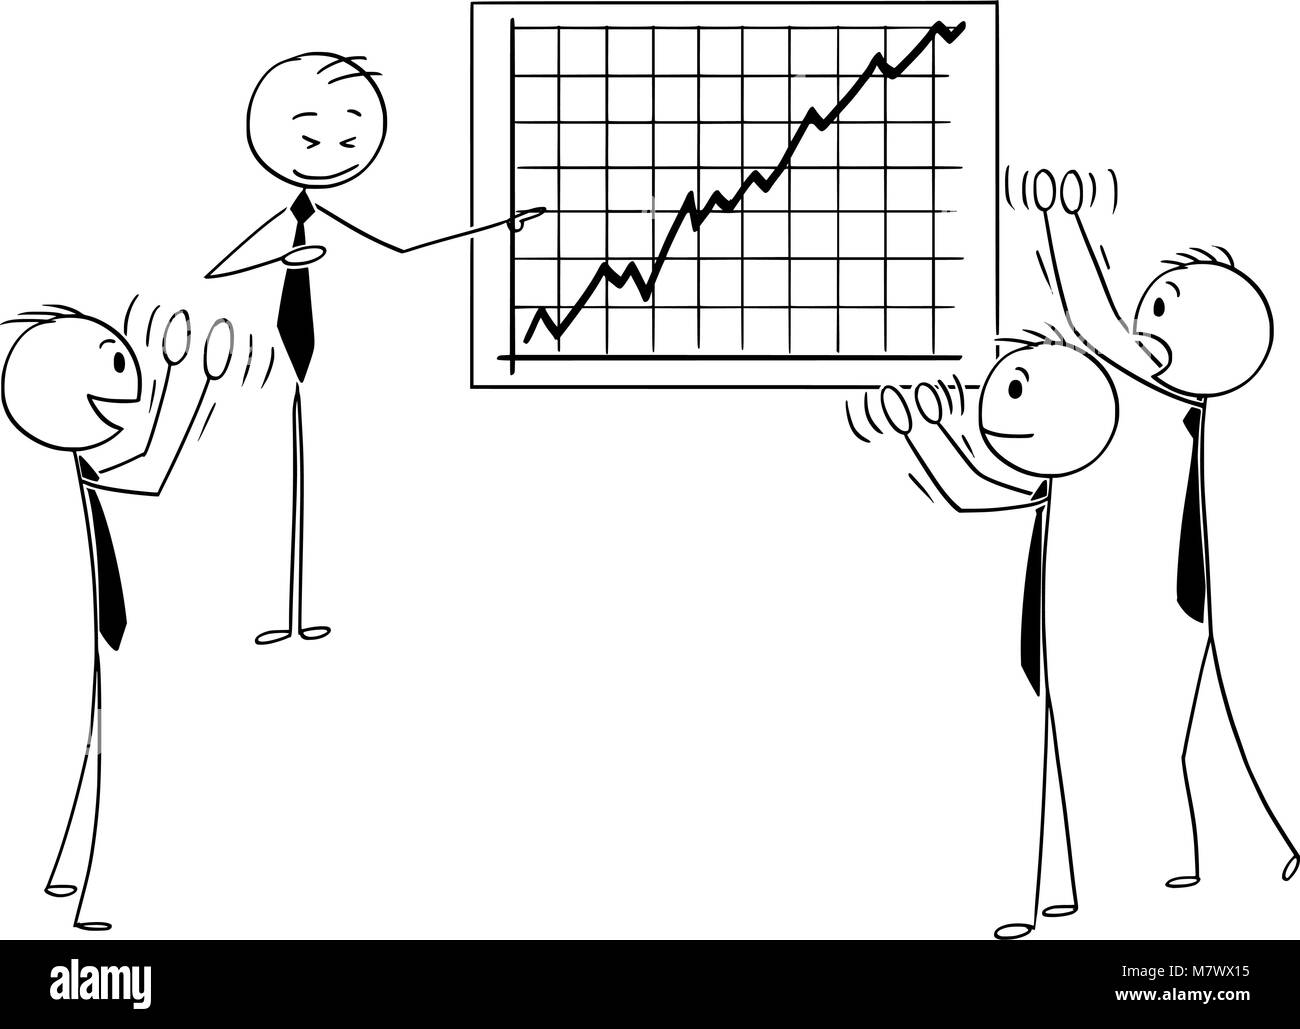 Cartoon of Business People Applauding to Speaker Pointing at Growth Chart Stock Vector